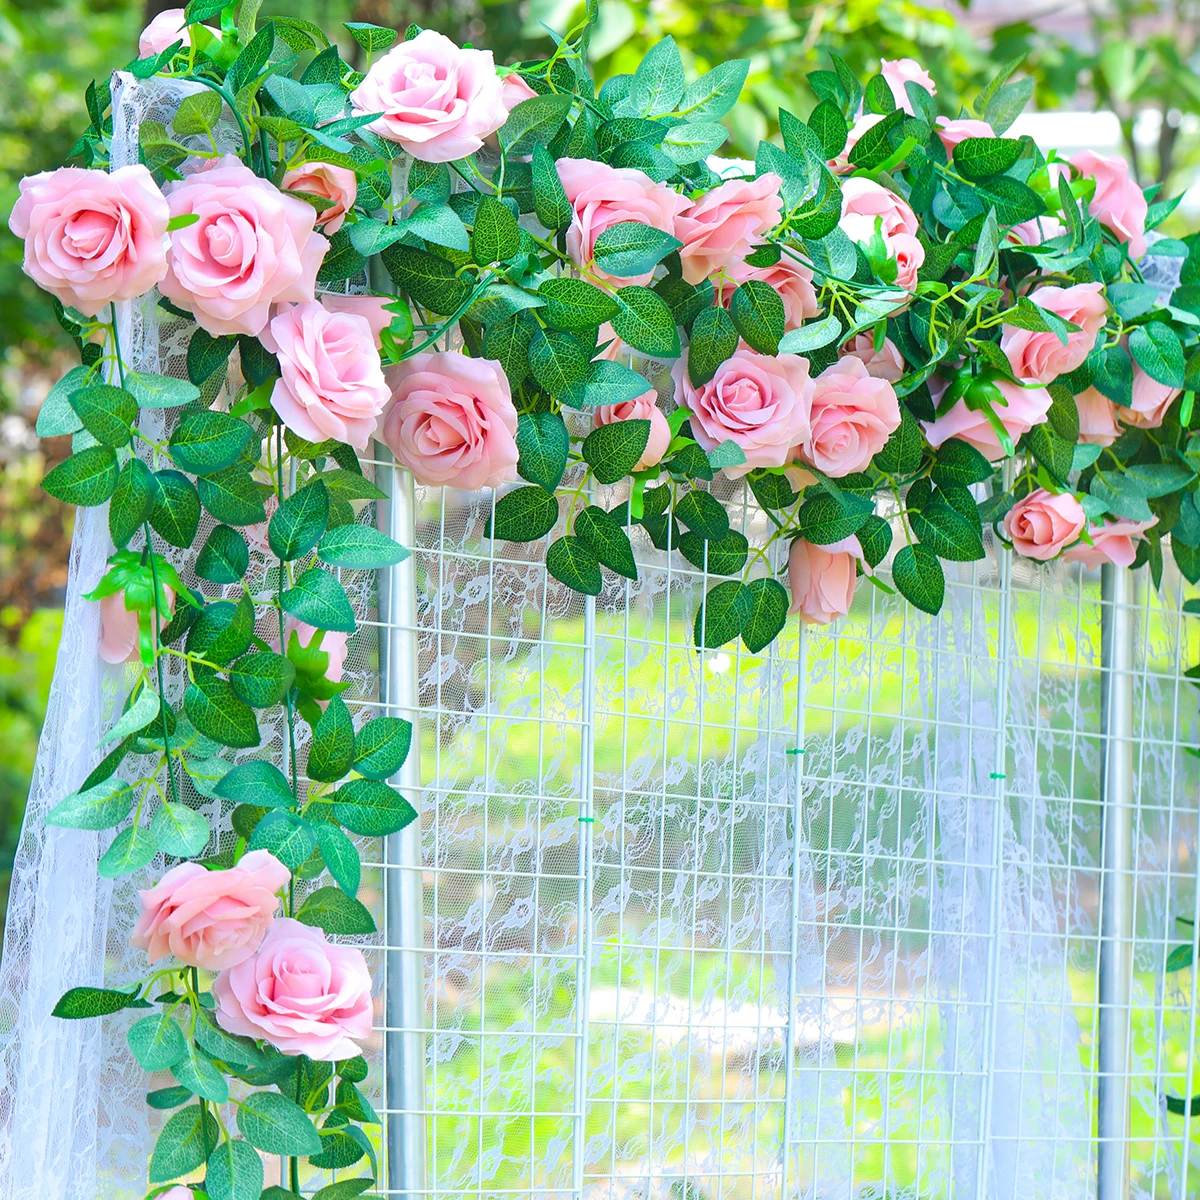 2pcs 2M Silk Artificial Rose Vine Hanging Flowers Rattan Fake Plants Leaves Garland for Wedding Home Wall Decoration